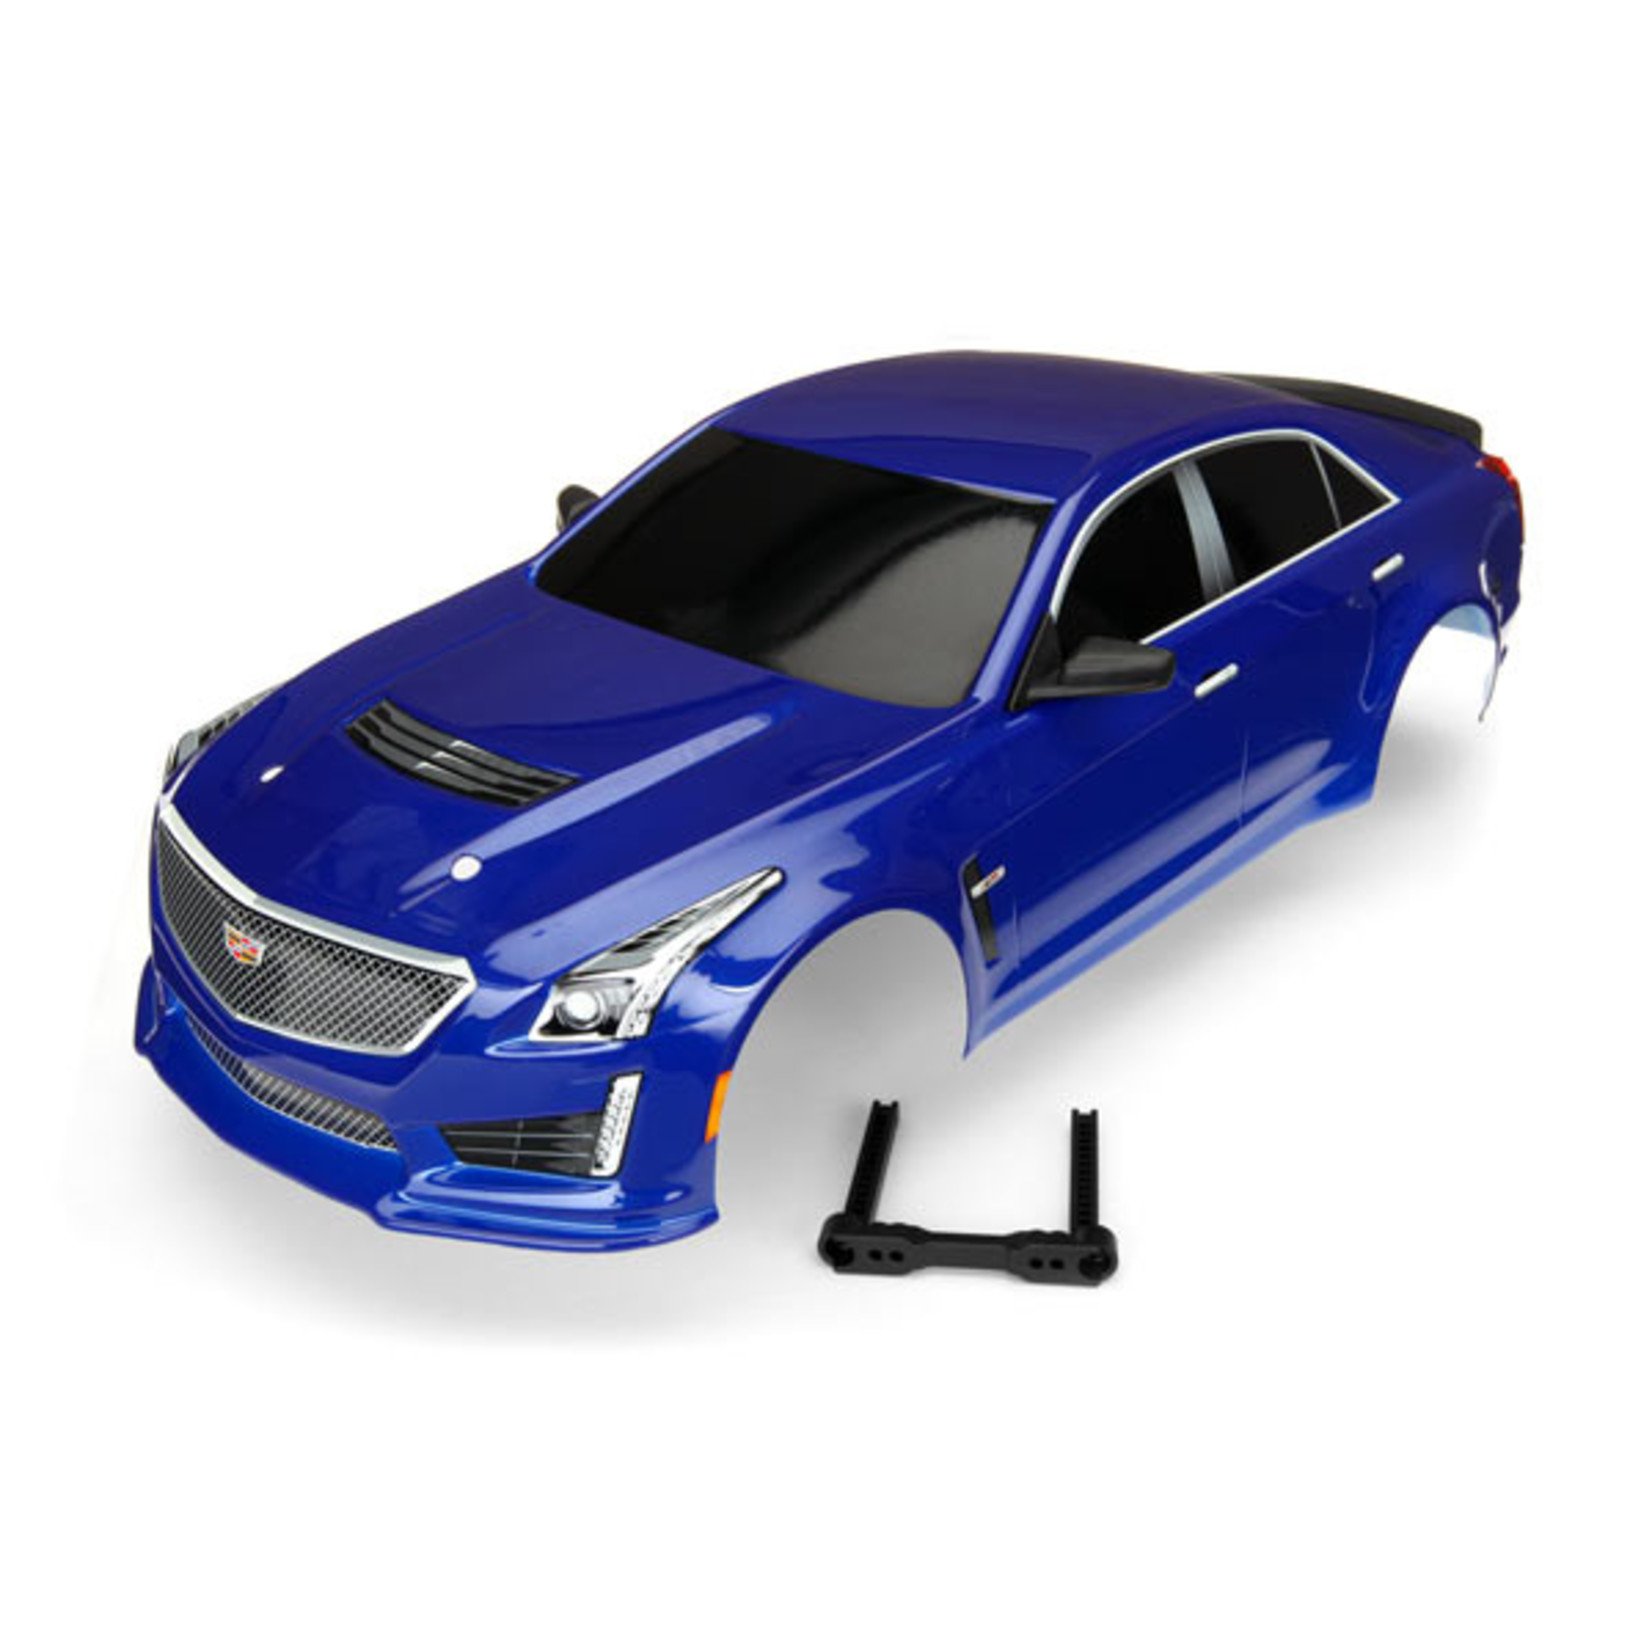 Traxxas 8391A - Body, Cadillac CTS-V, blue (painted, decals app